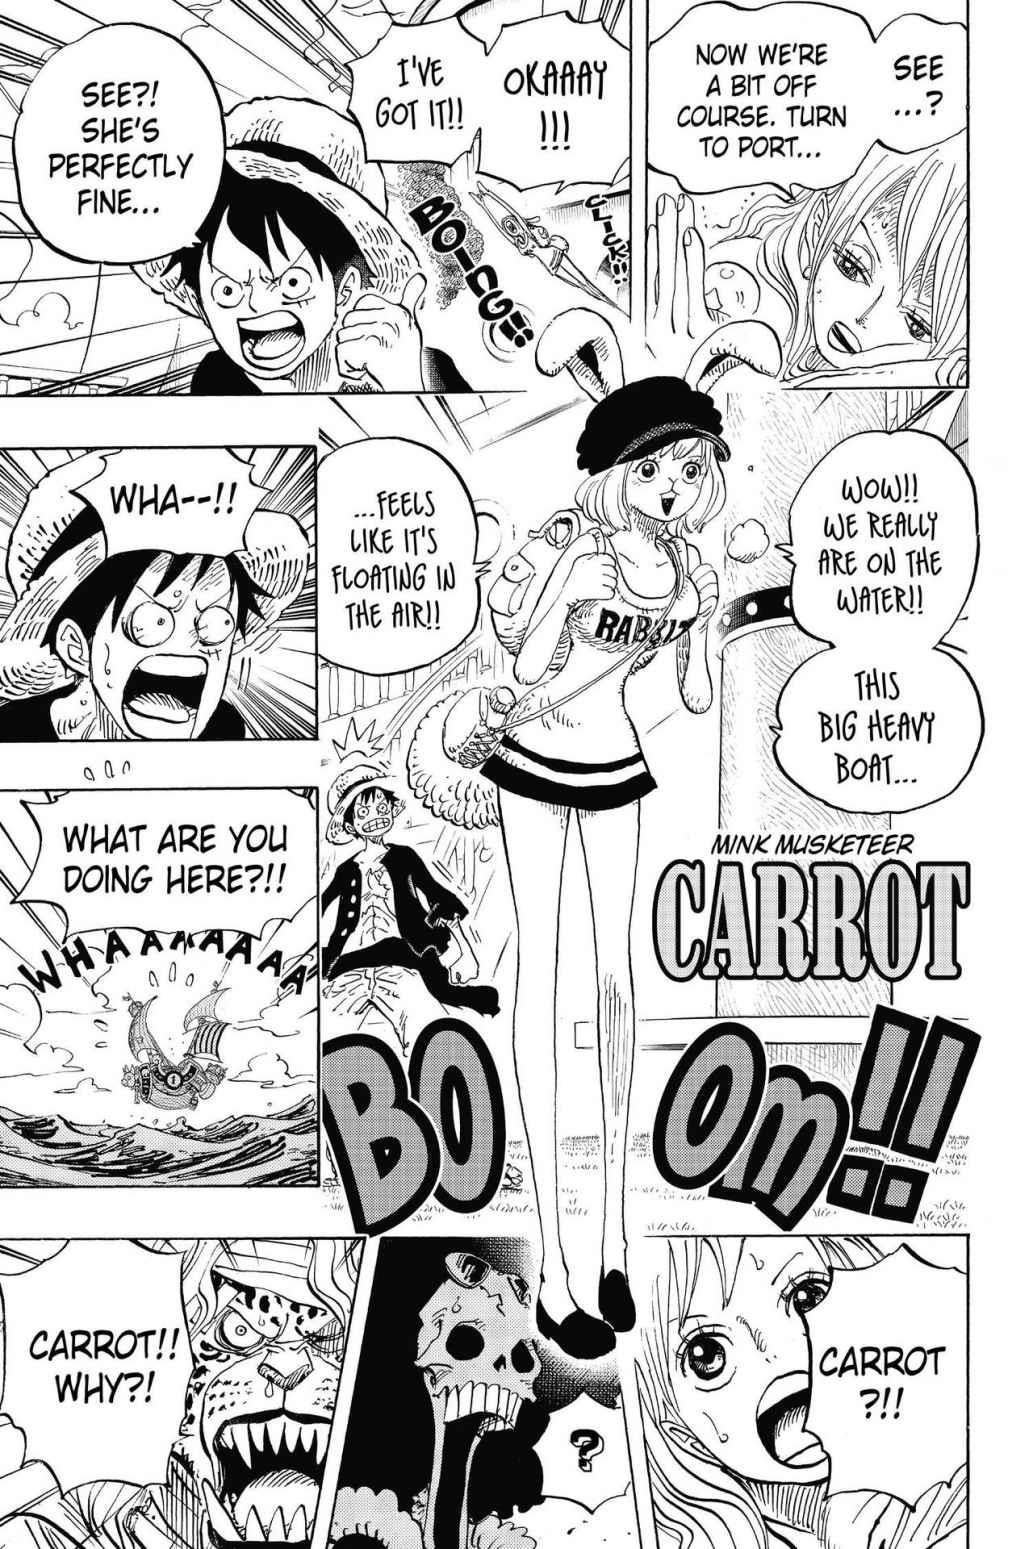 One Piece manga chapter 1057 release date, time and detailed spoilers